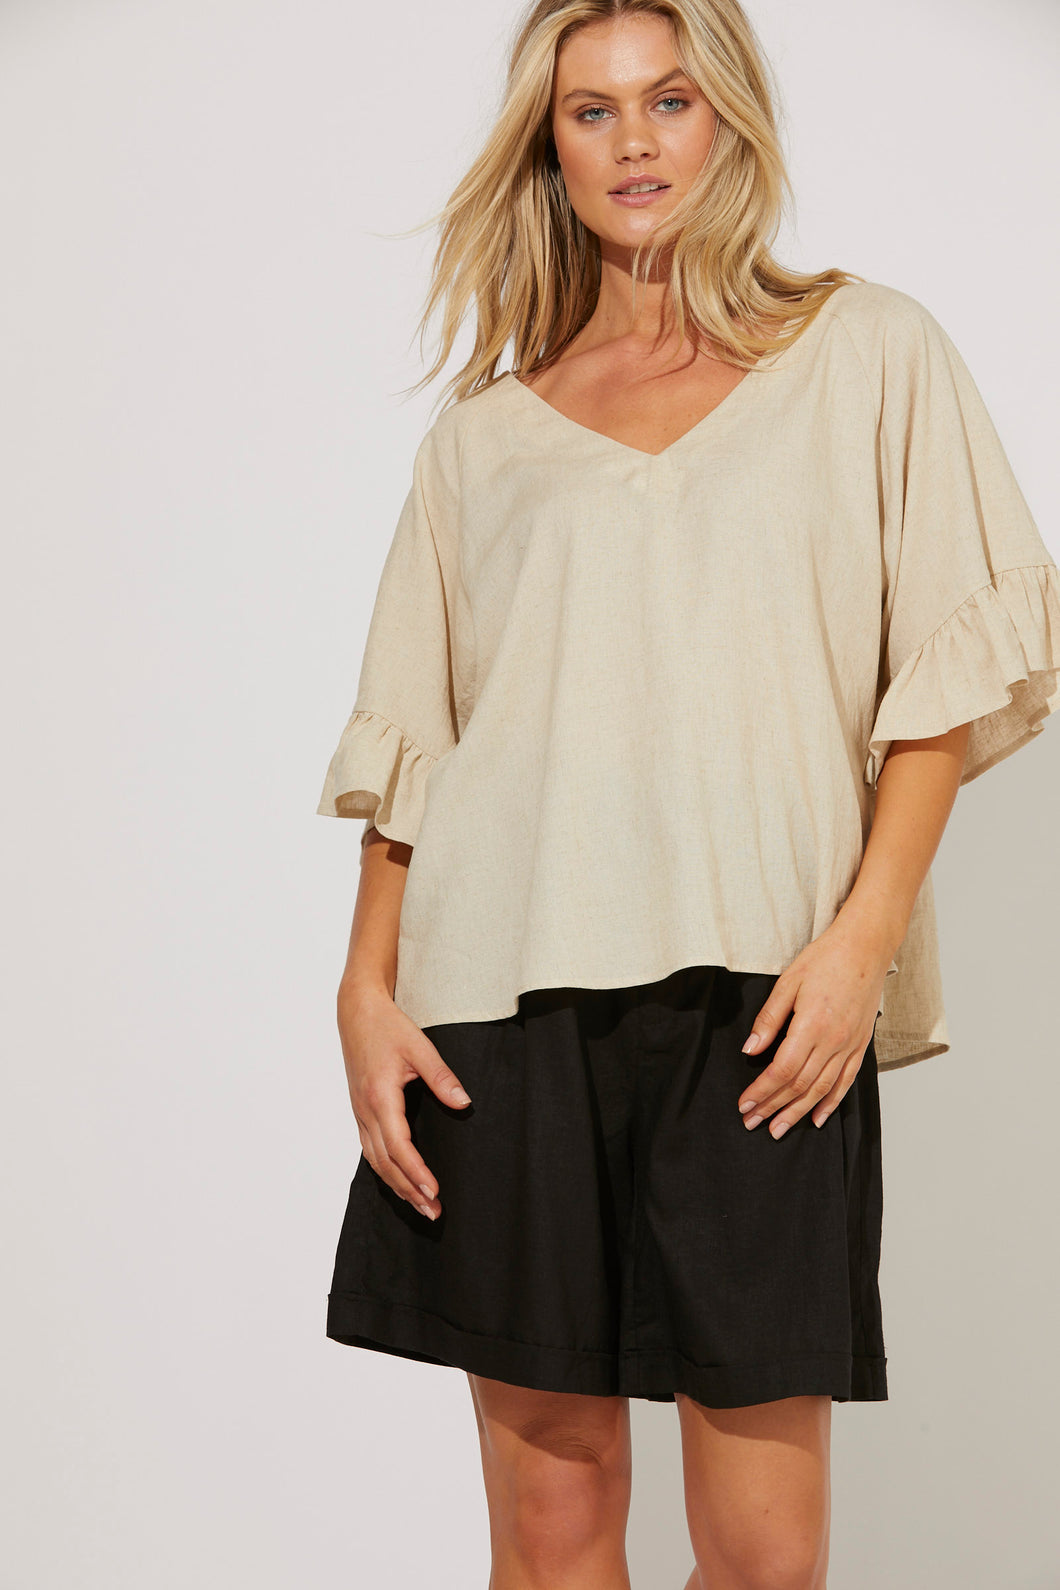 Nevis Relaxed Top, black, melon, canvas, salt, one size, v-neck, frilled sleeve, linen blend, summer, winter, stylish, eb&ive, isle of mine, haven, jogger, denim, smart casual, comfortable, on trend, inclusive sizing, Australian designers, fashion, options, eco friendly options, sustainable clothing, sourced locally, lady start up, small business, support small business, knits, sale, ethically manufactured